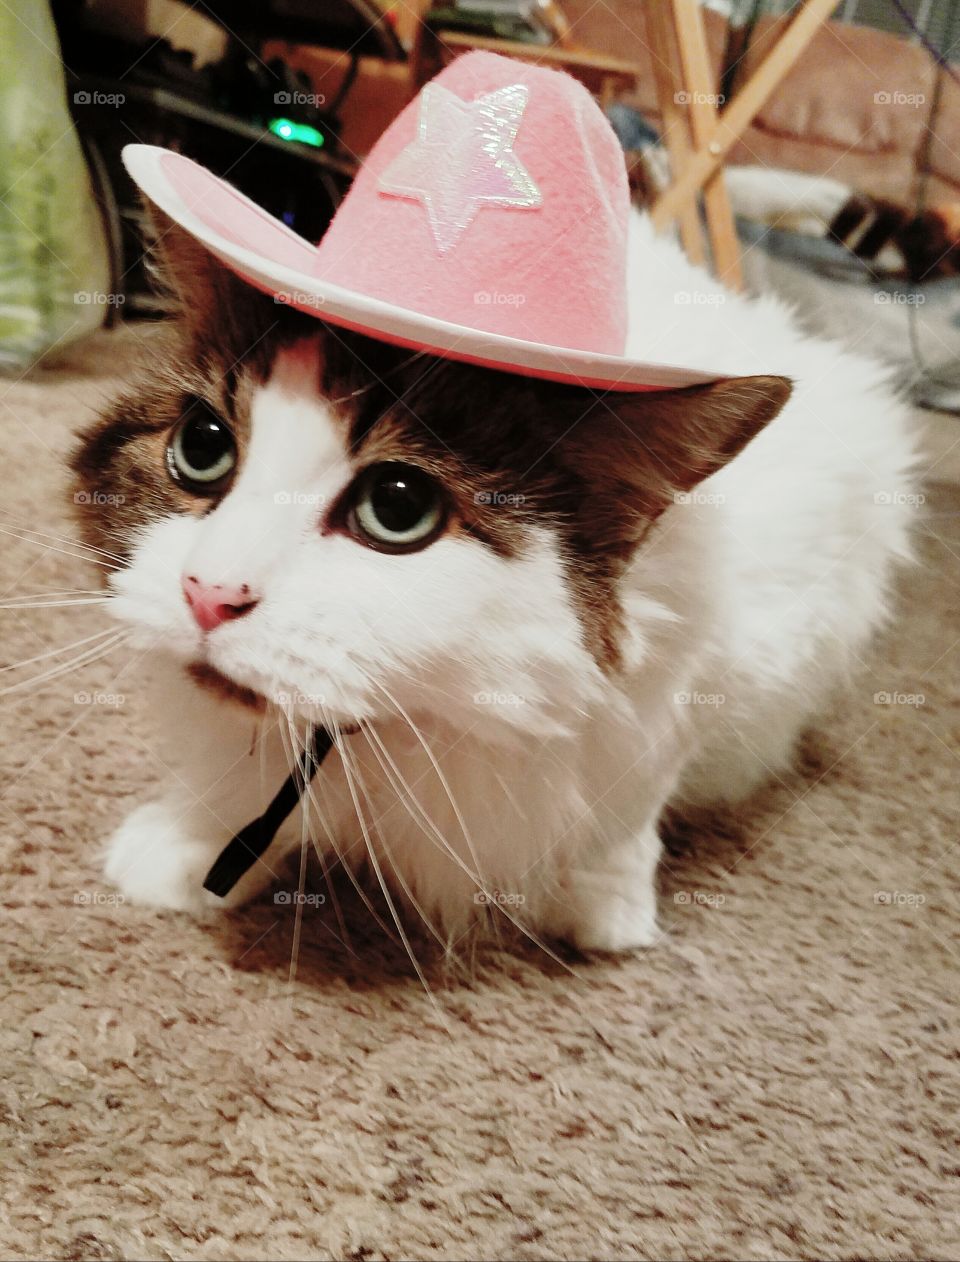 Cat of the West